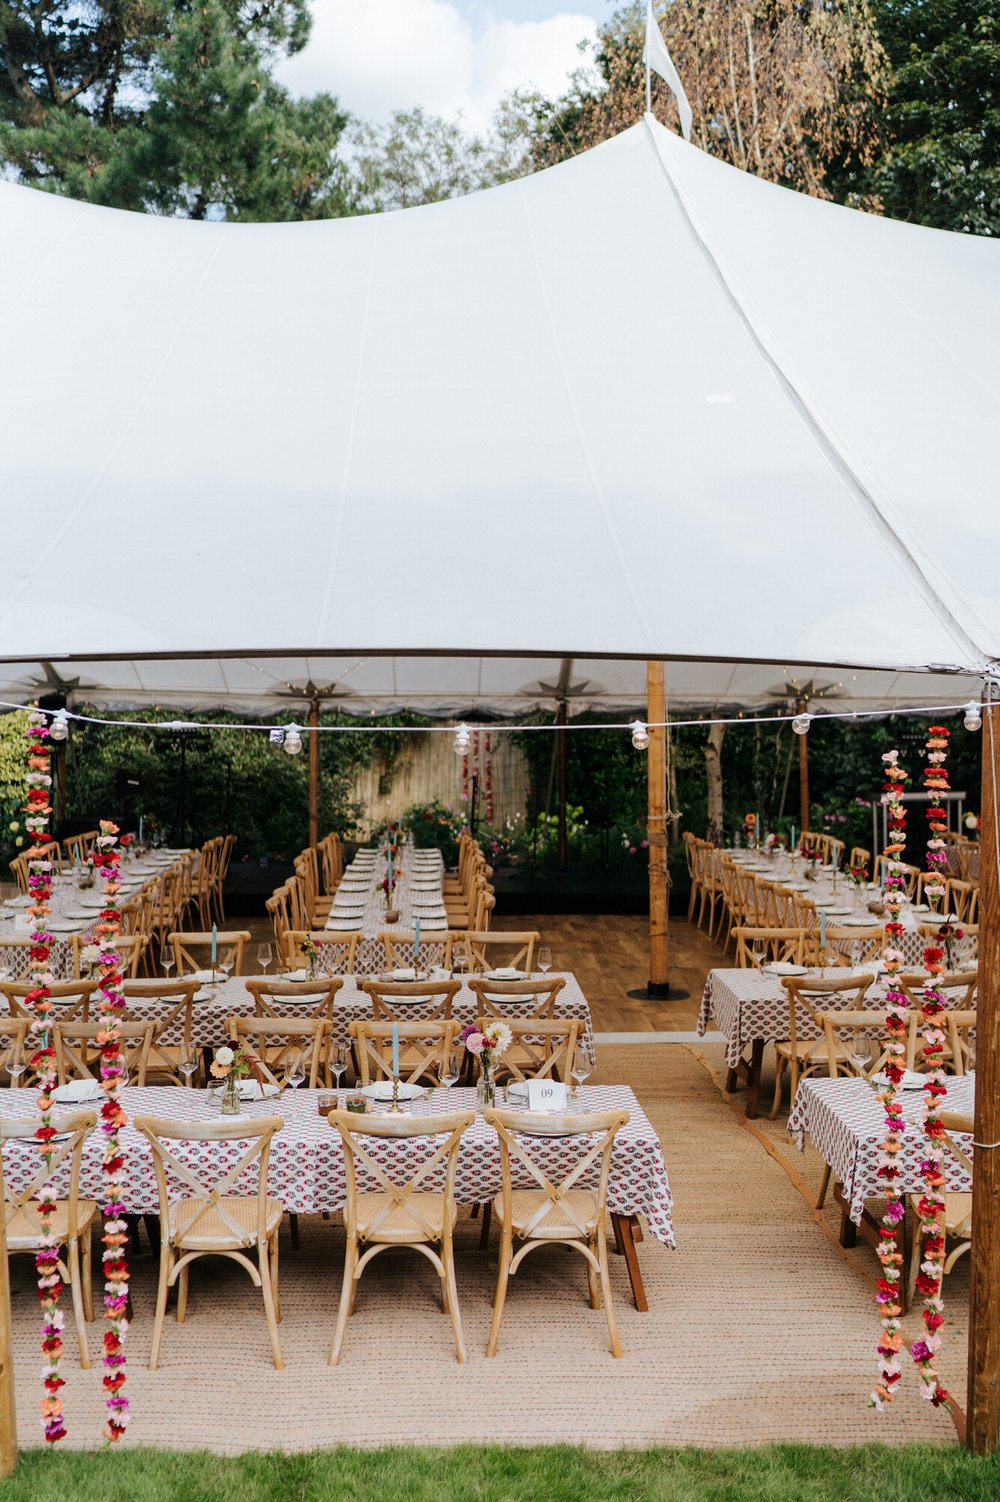 Wide photograph of the marquee where the wedding breakfast will take place